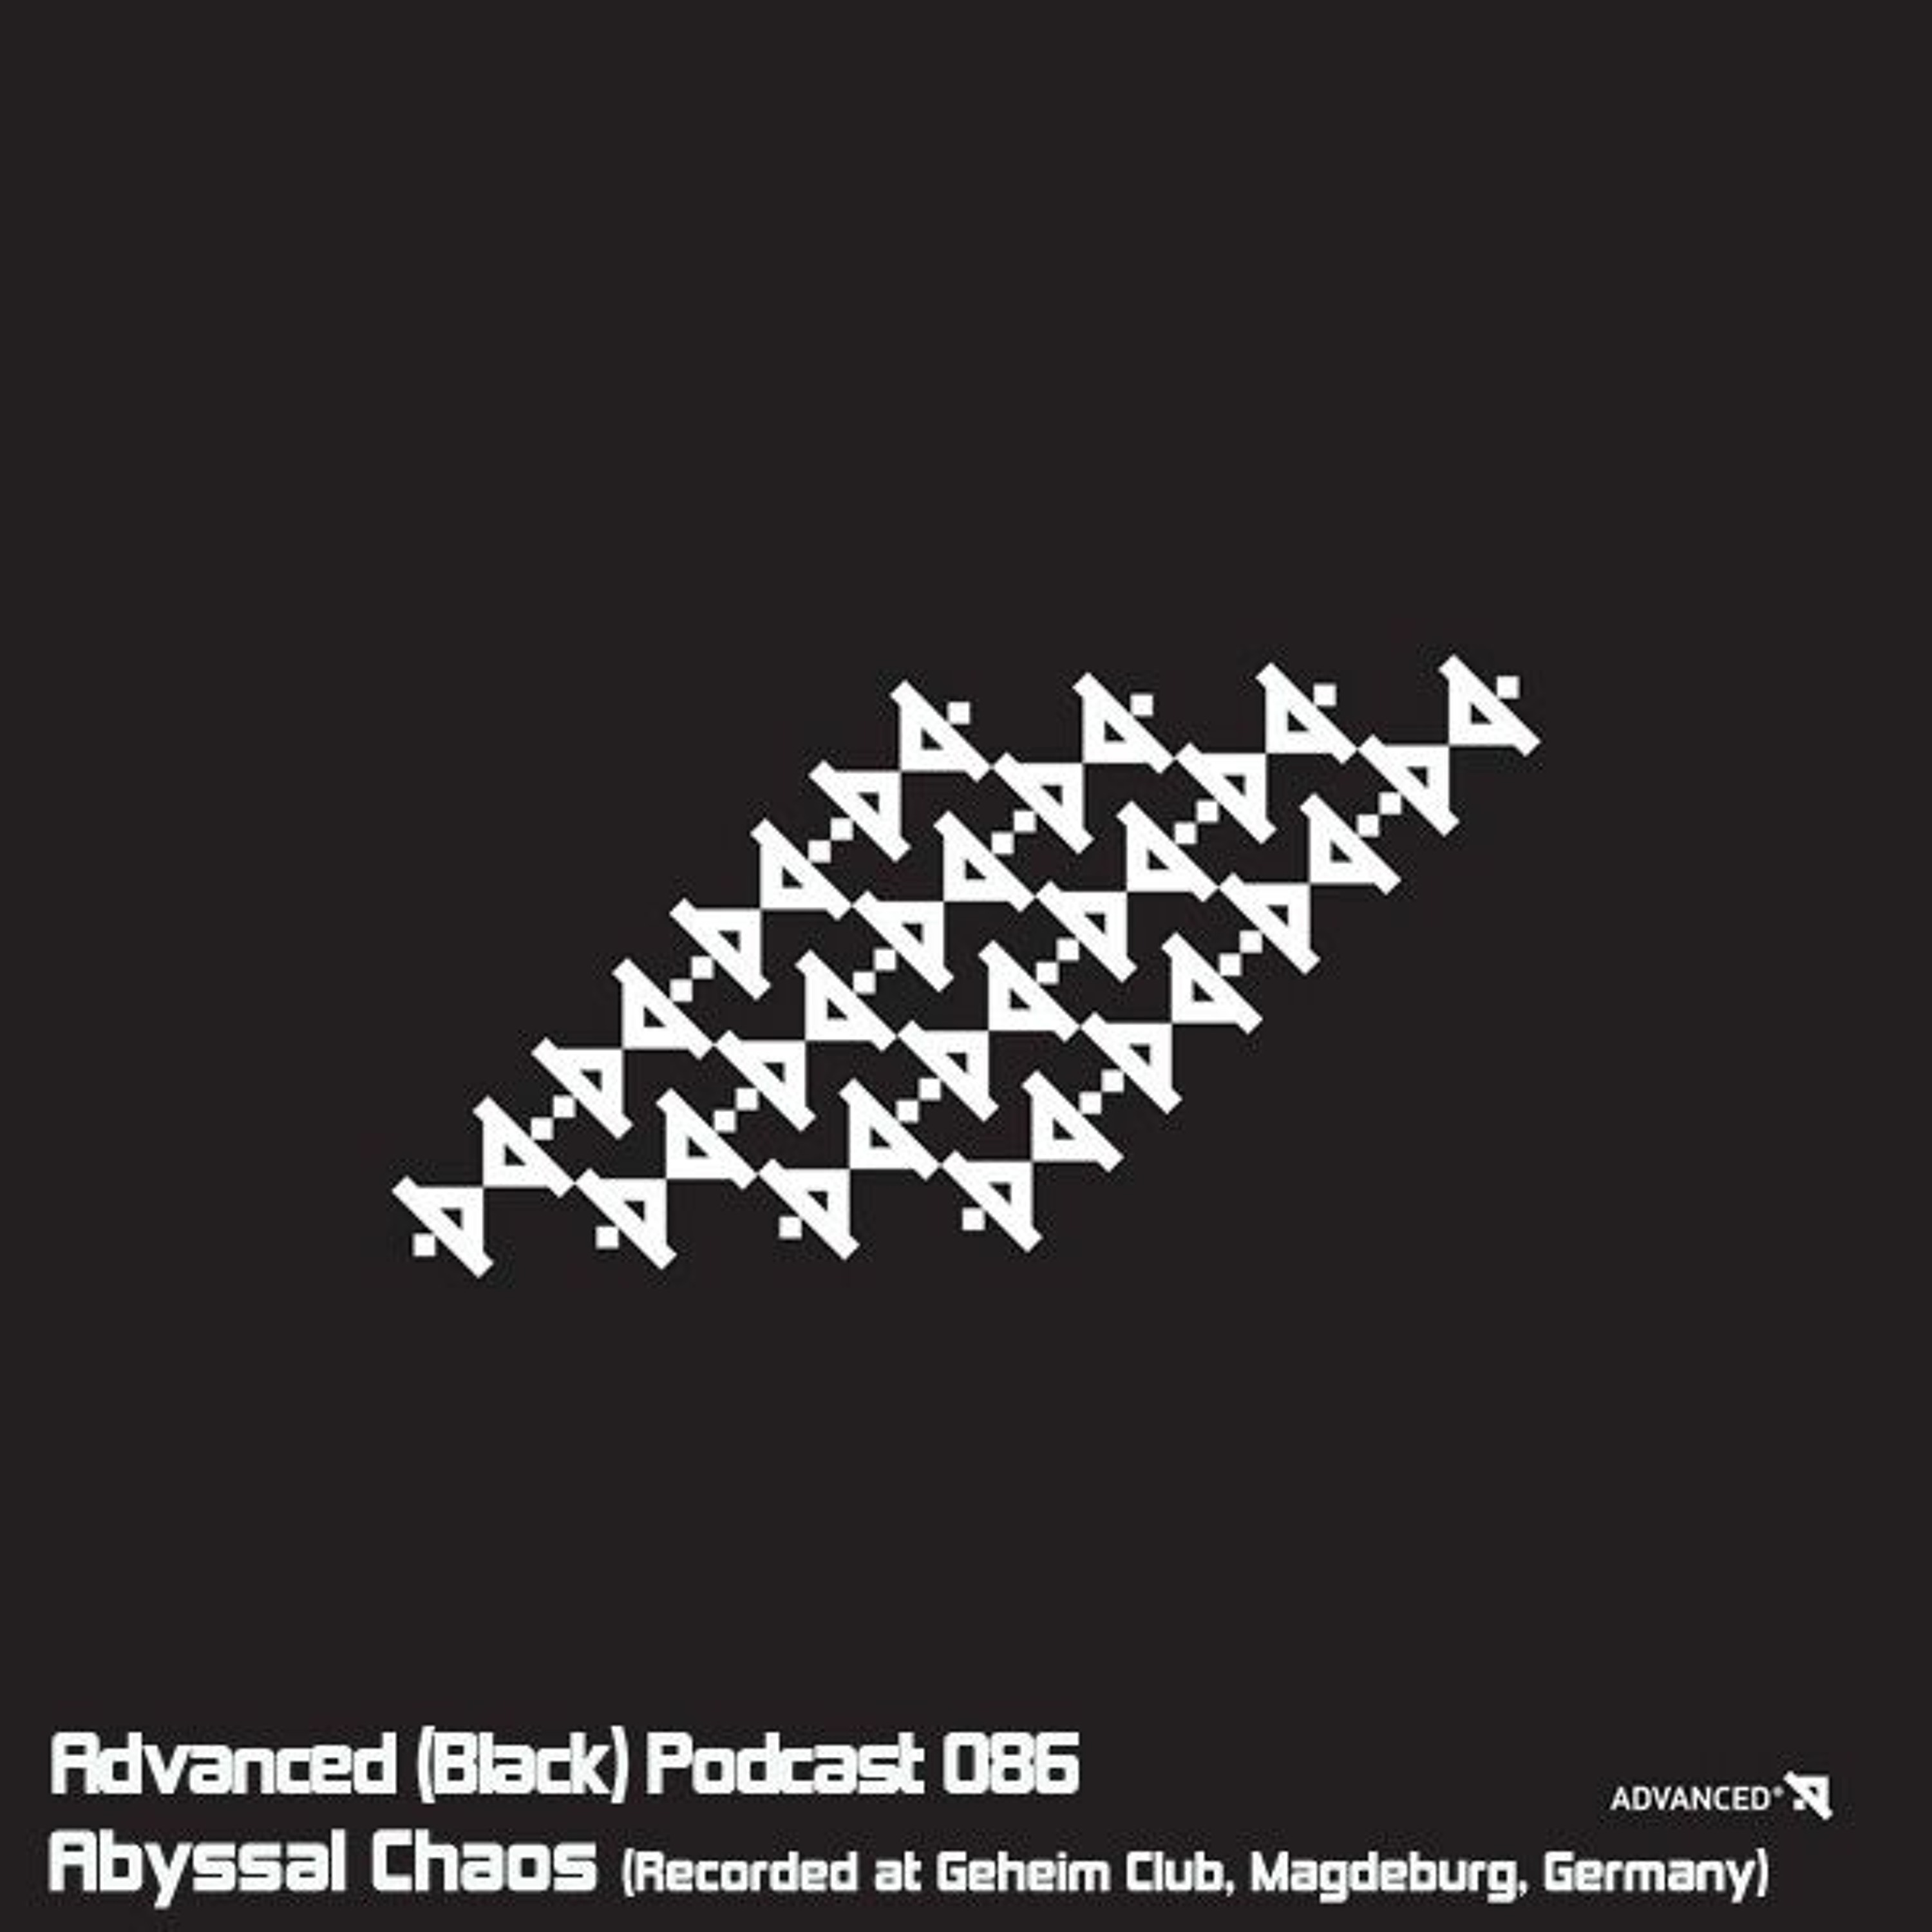 Advanced (Black) Podcast 086 with Abyssal Chaos (Recorded at Geheim Club, Magdeburg, Germany)